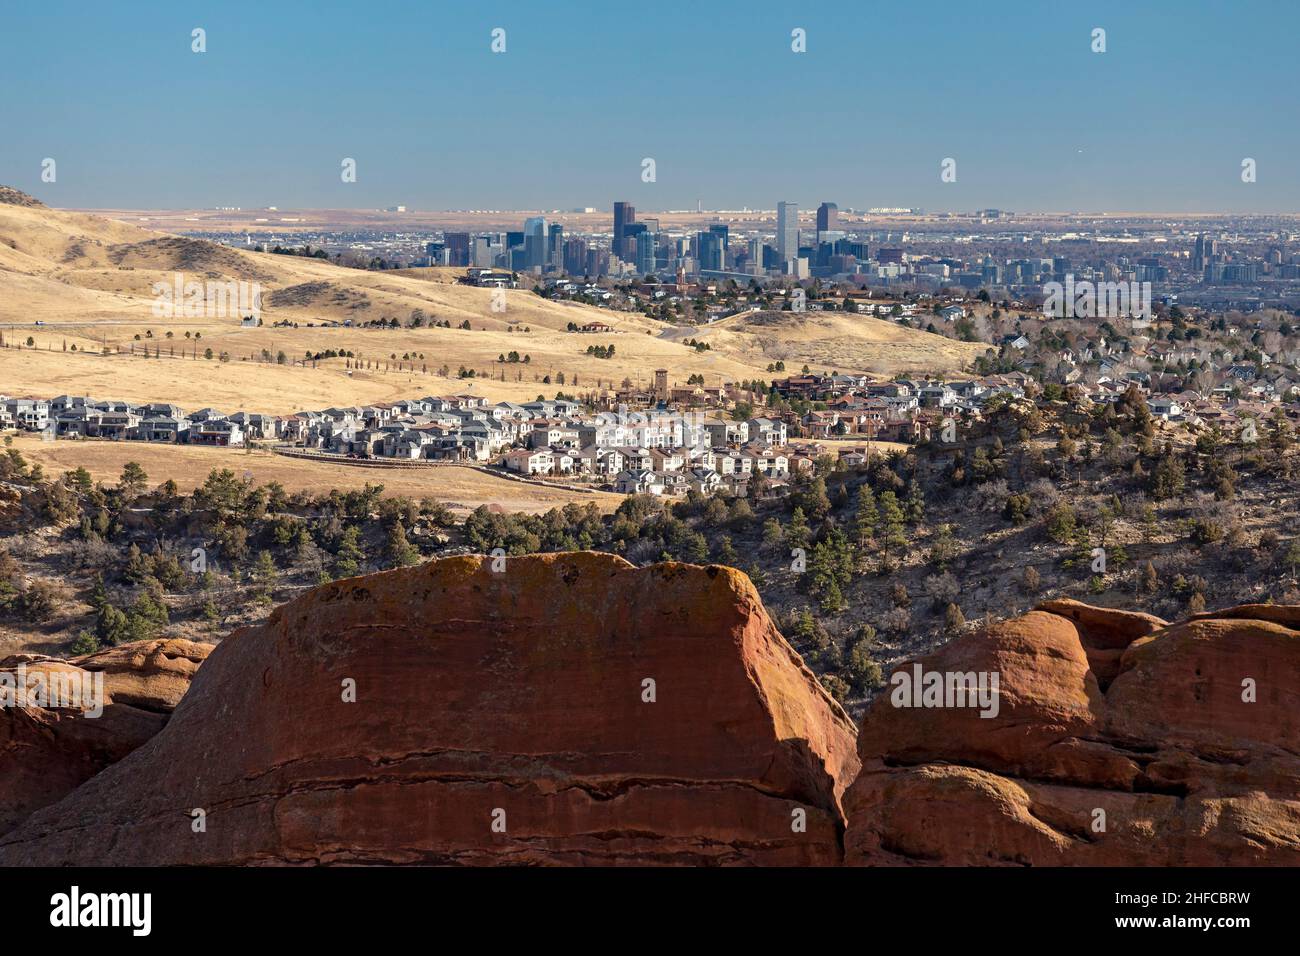 Morrison, Colorado - Downtown Denver, from Red Rocks Ampitheatre, a popular concert venue ten miles away in the Rocky Mountain foothills. Stock Photo